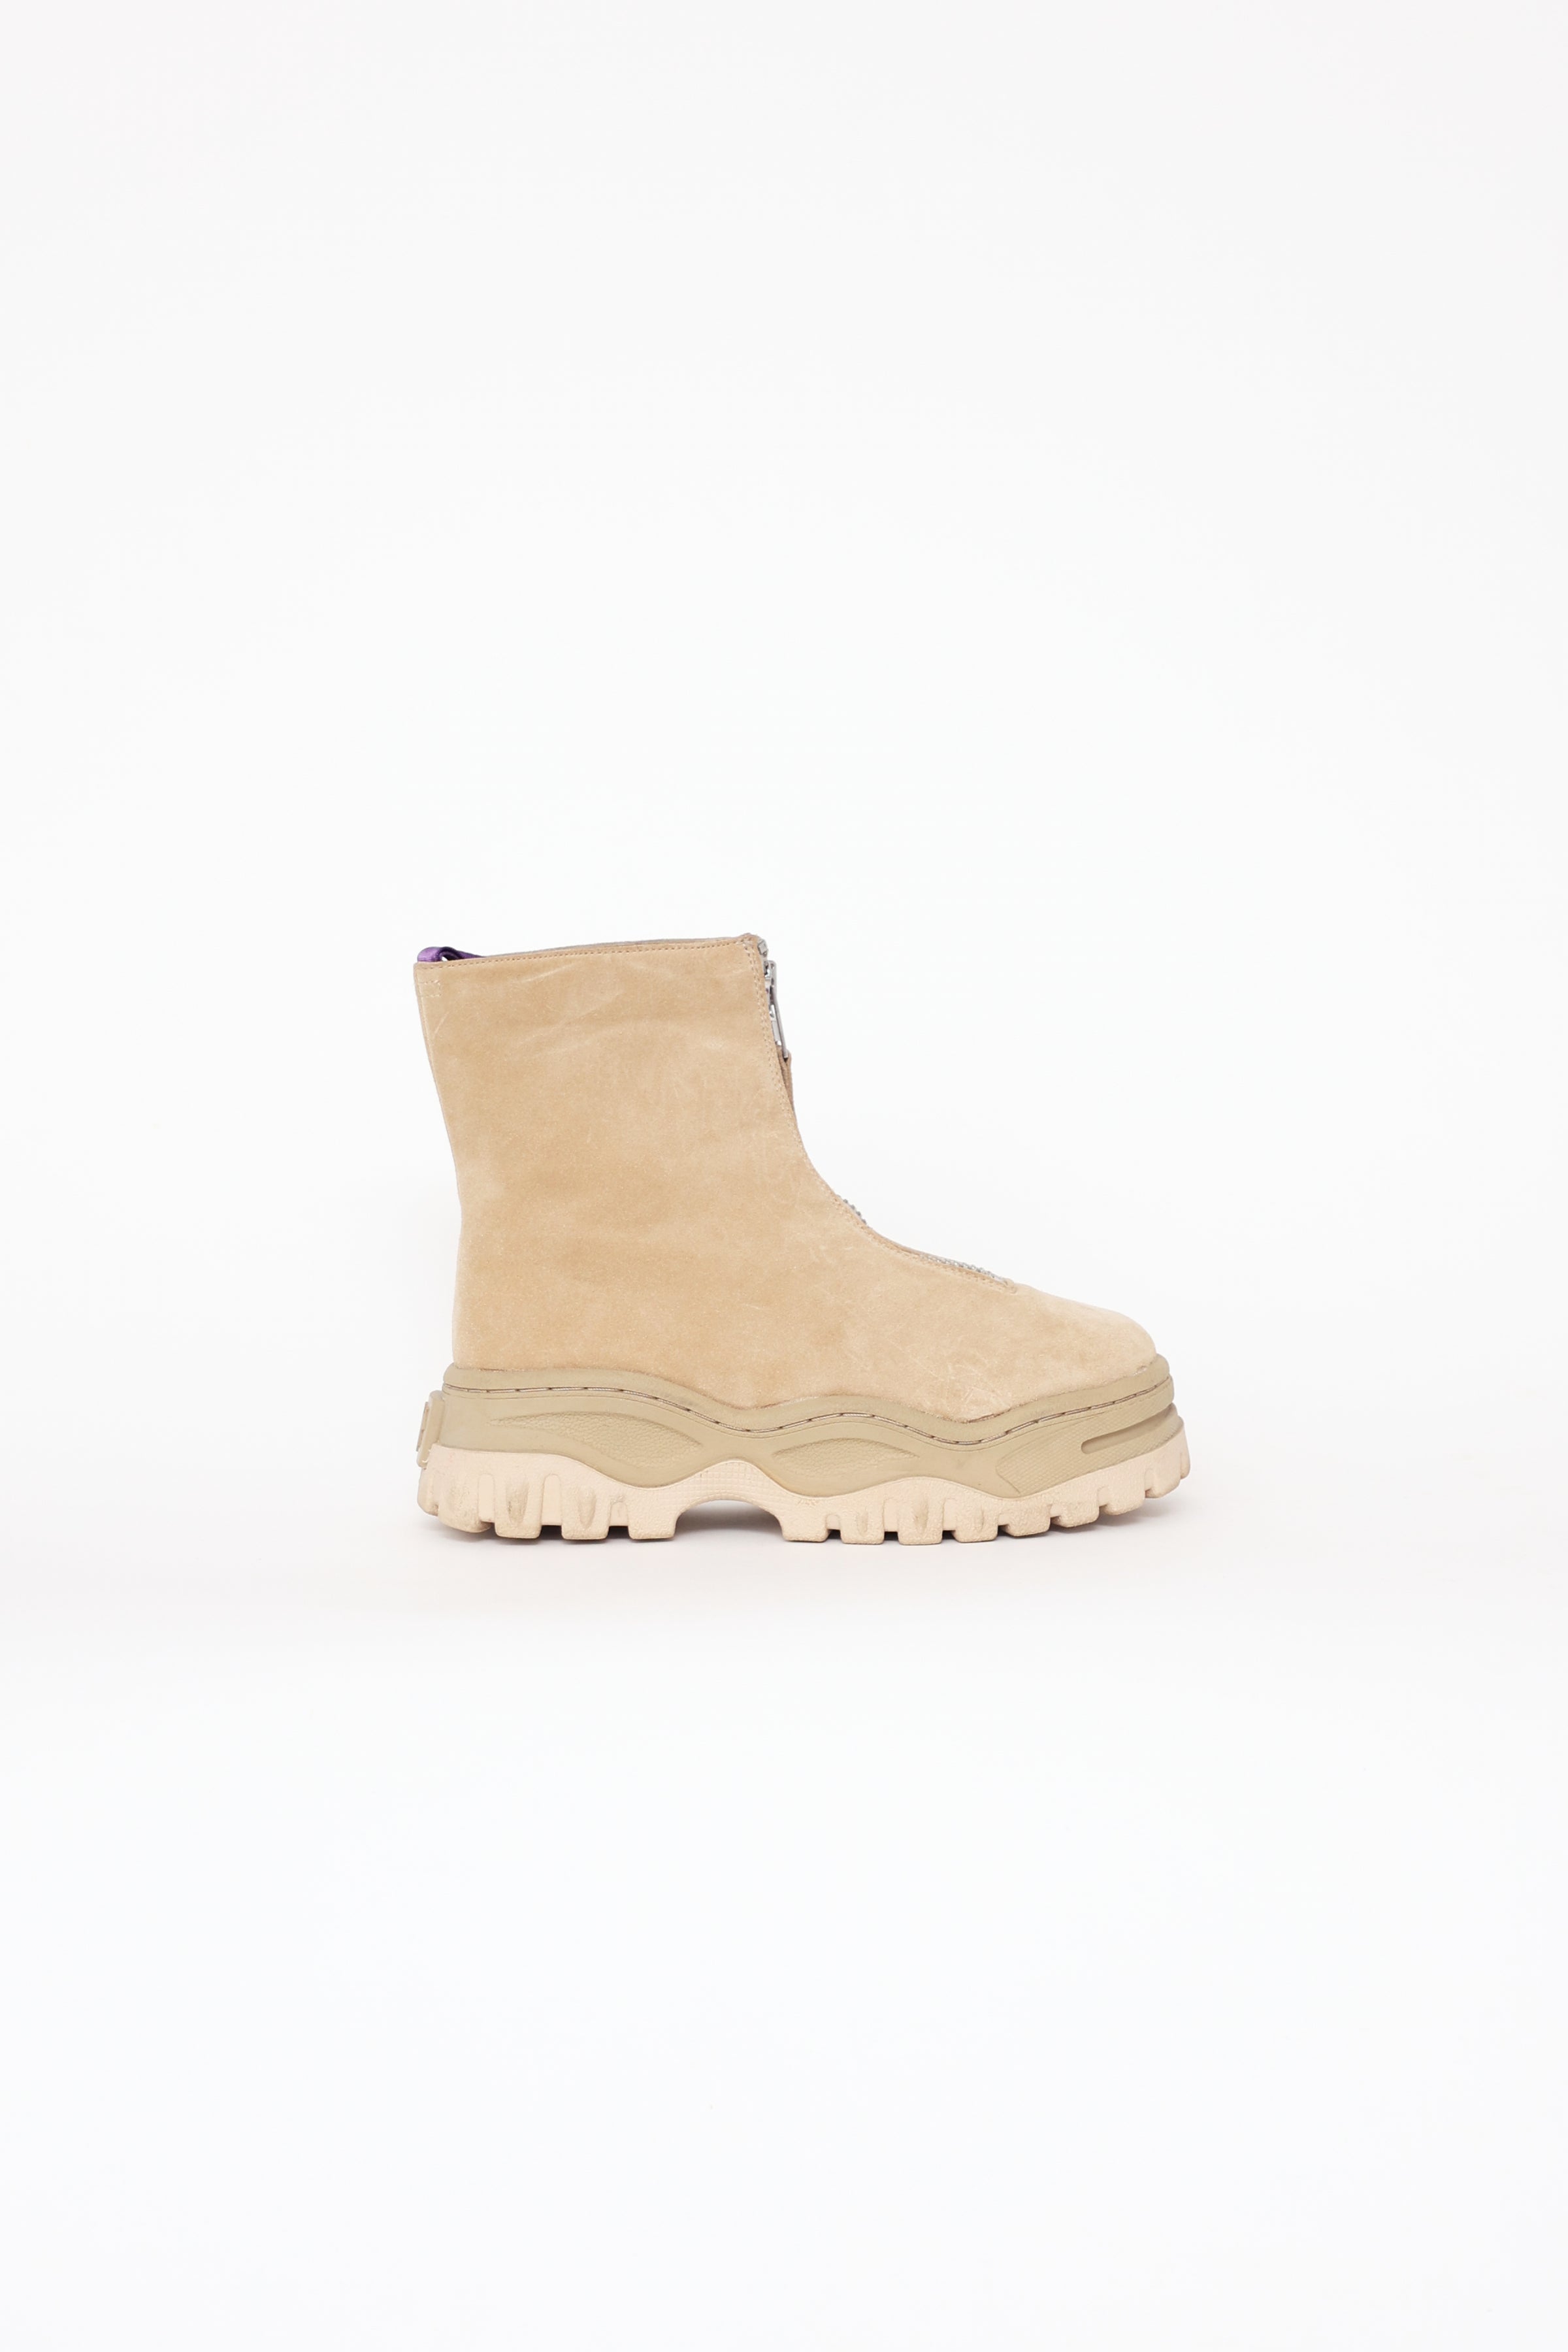 Eytys // Beige Suede Raven Chunky Boots – VSP Consignment